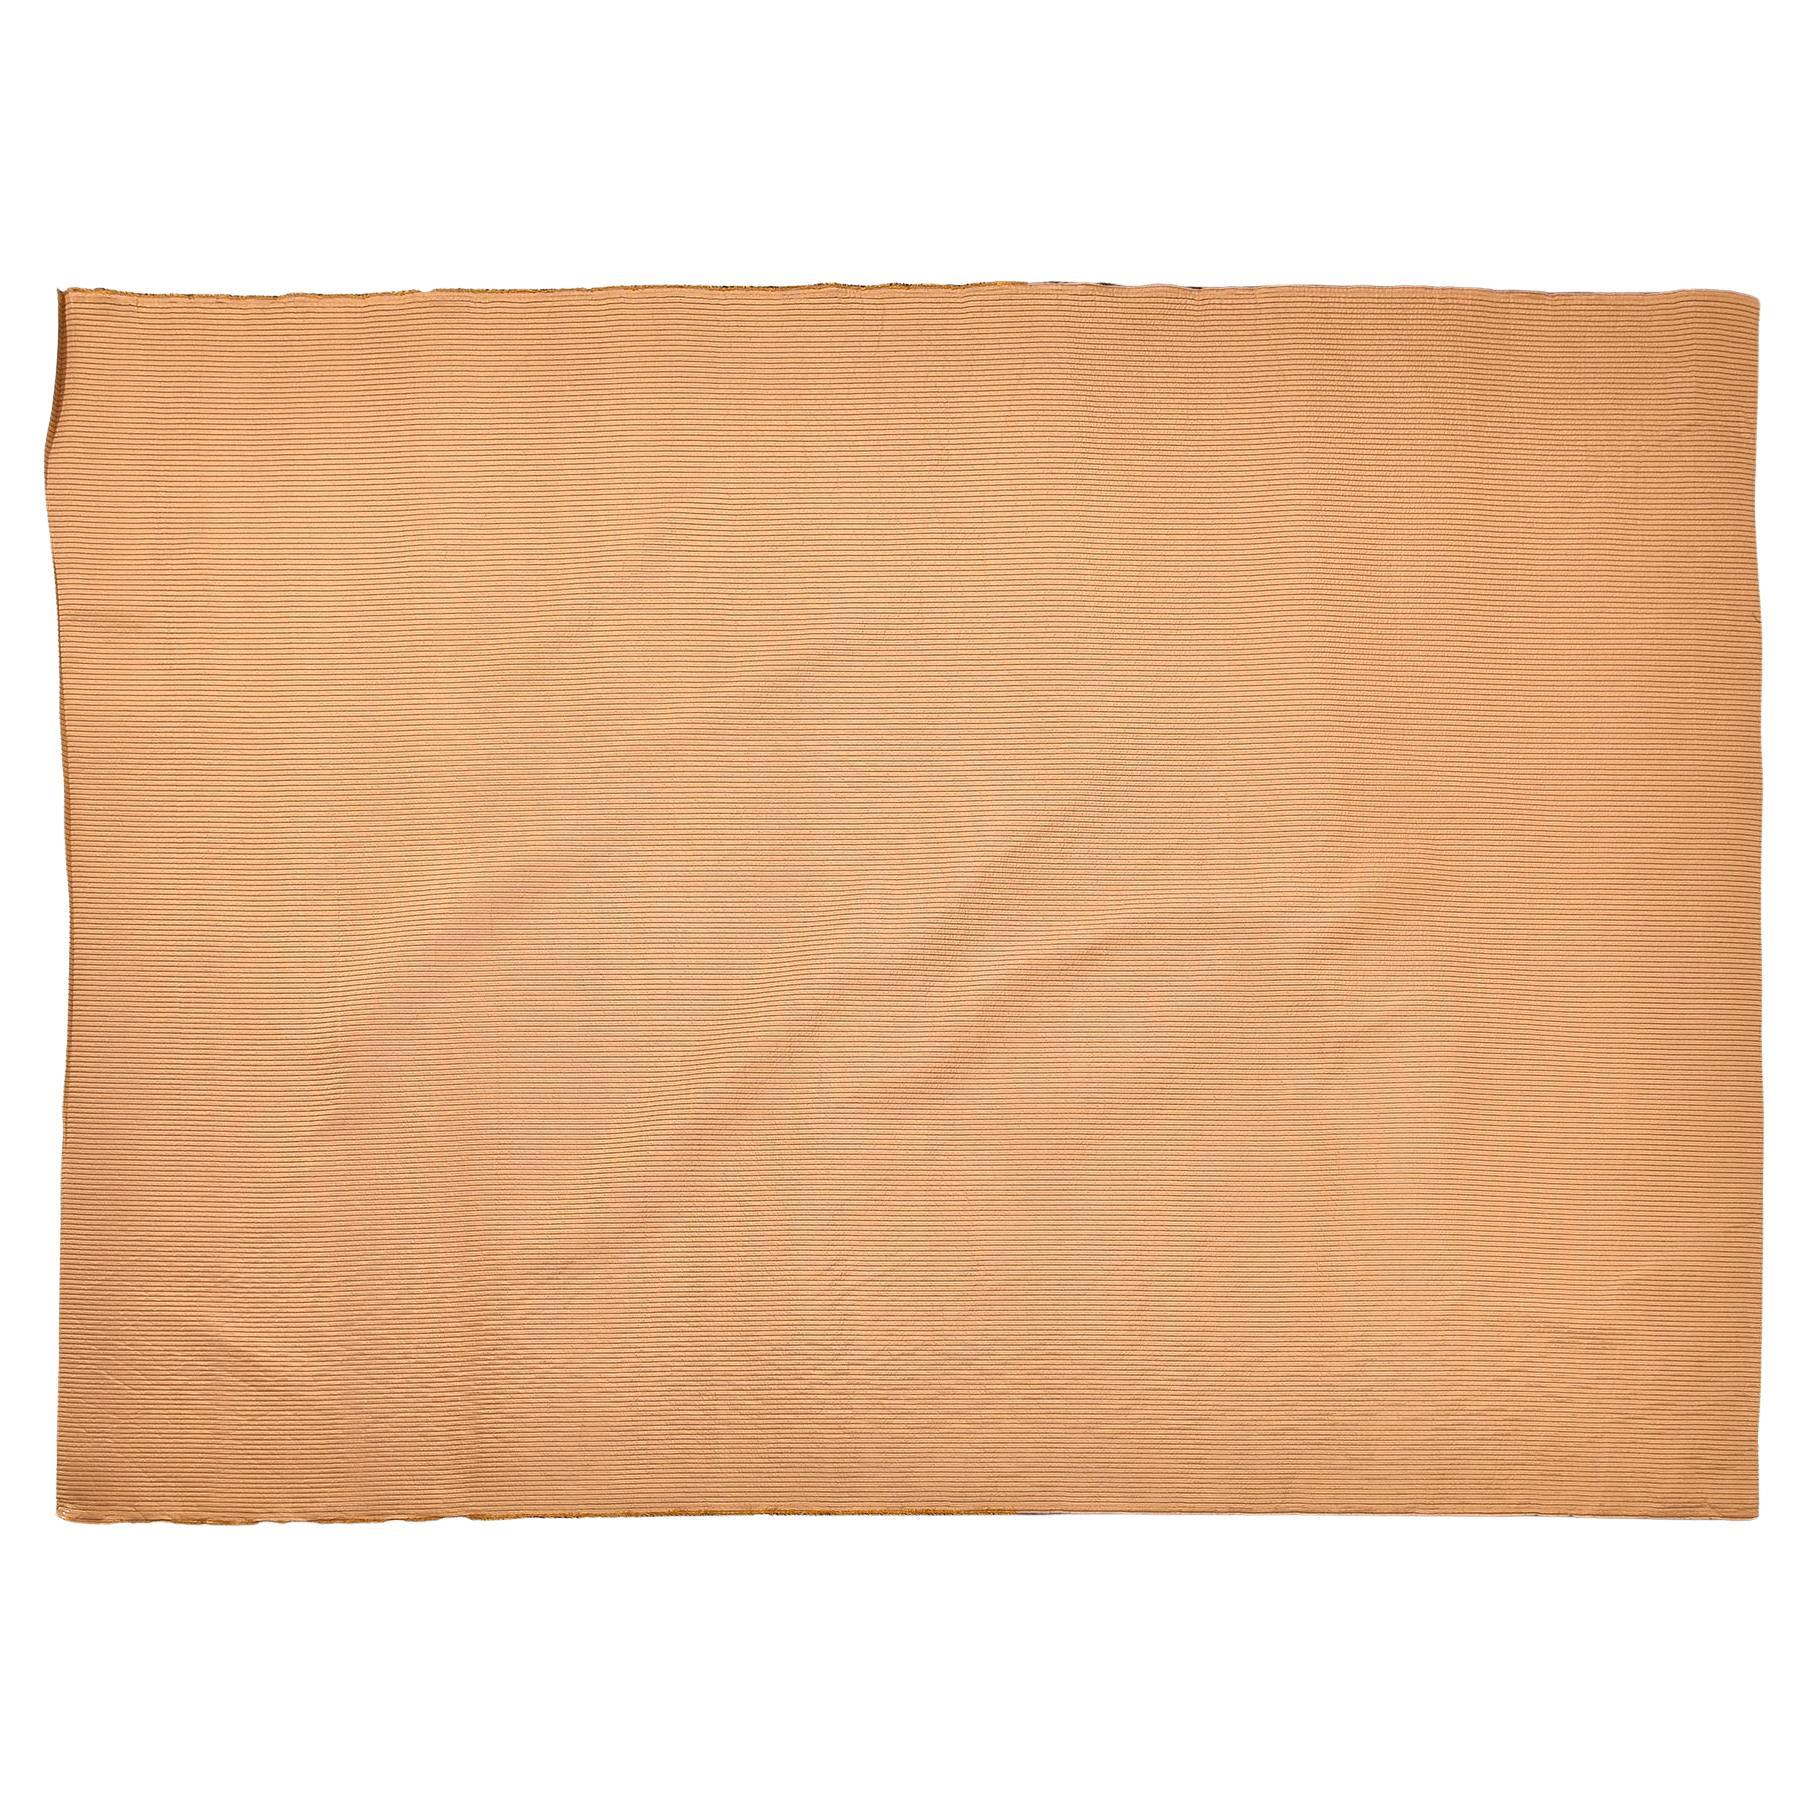 T/248 - Elegant Mulberry camel fabric for an elegant bed headboard or other ideas.
57% silk.